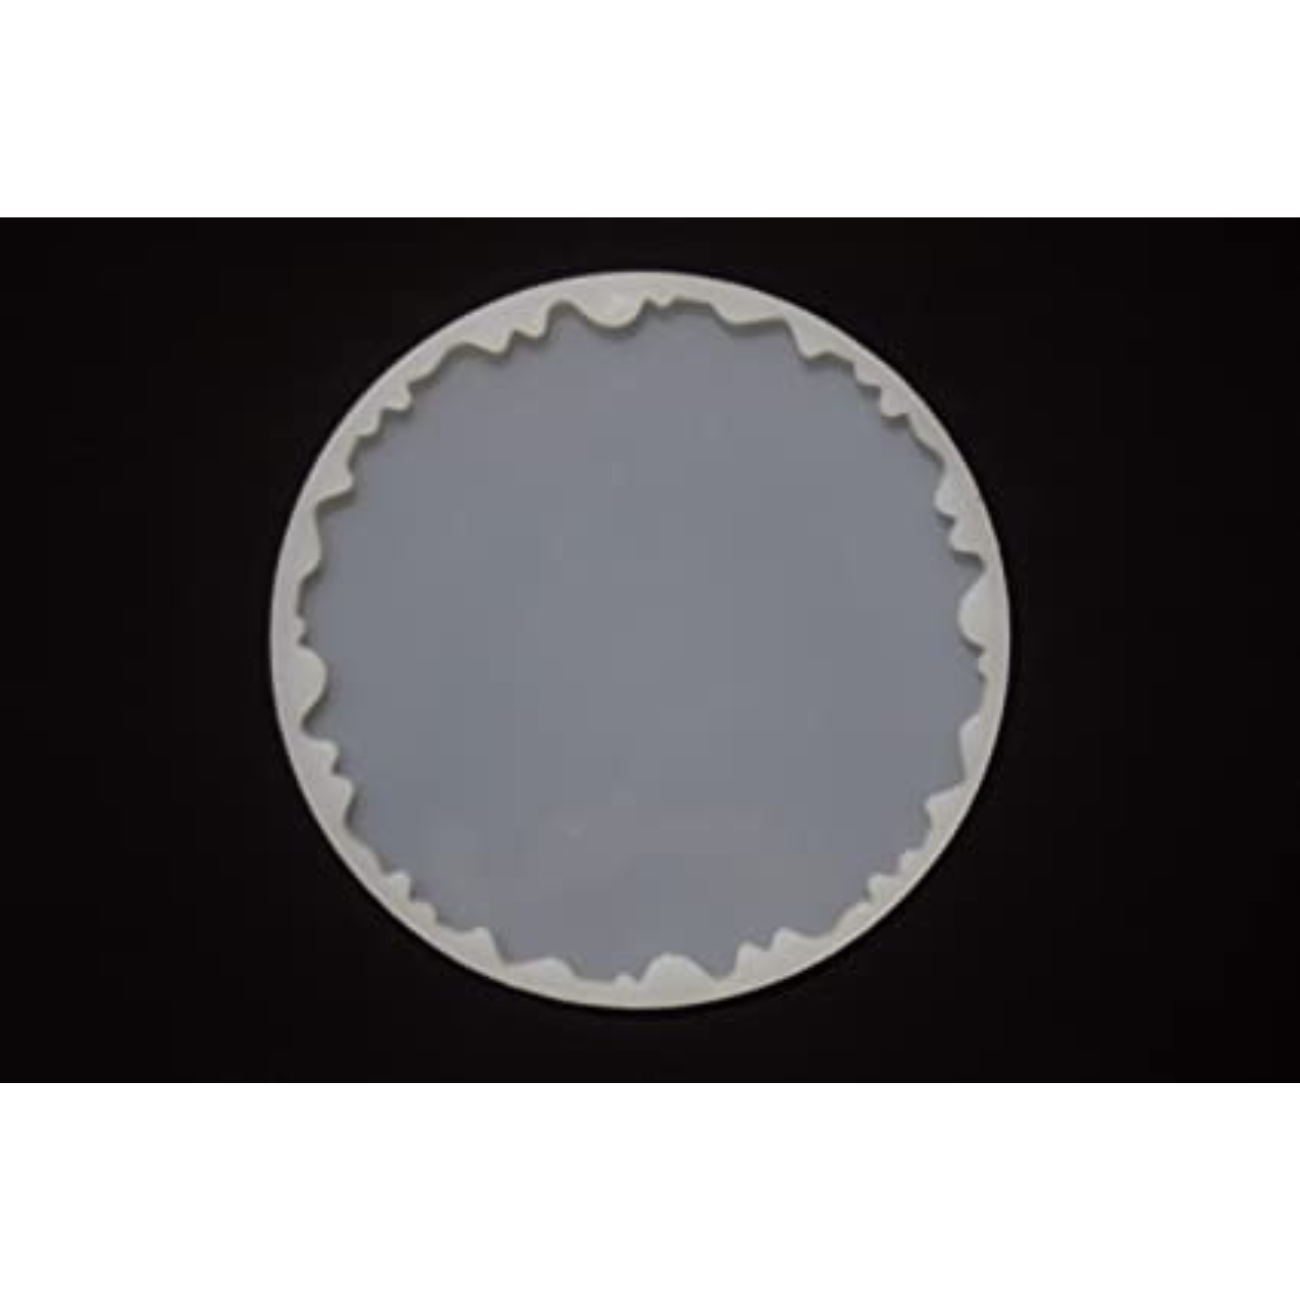 sodee-agate-tray-resin-mould-8-quot